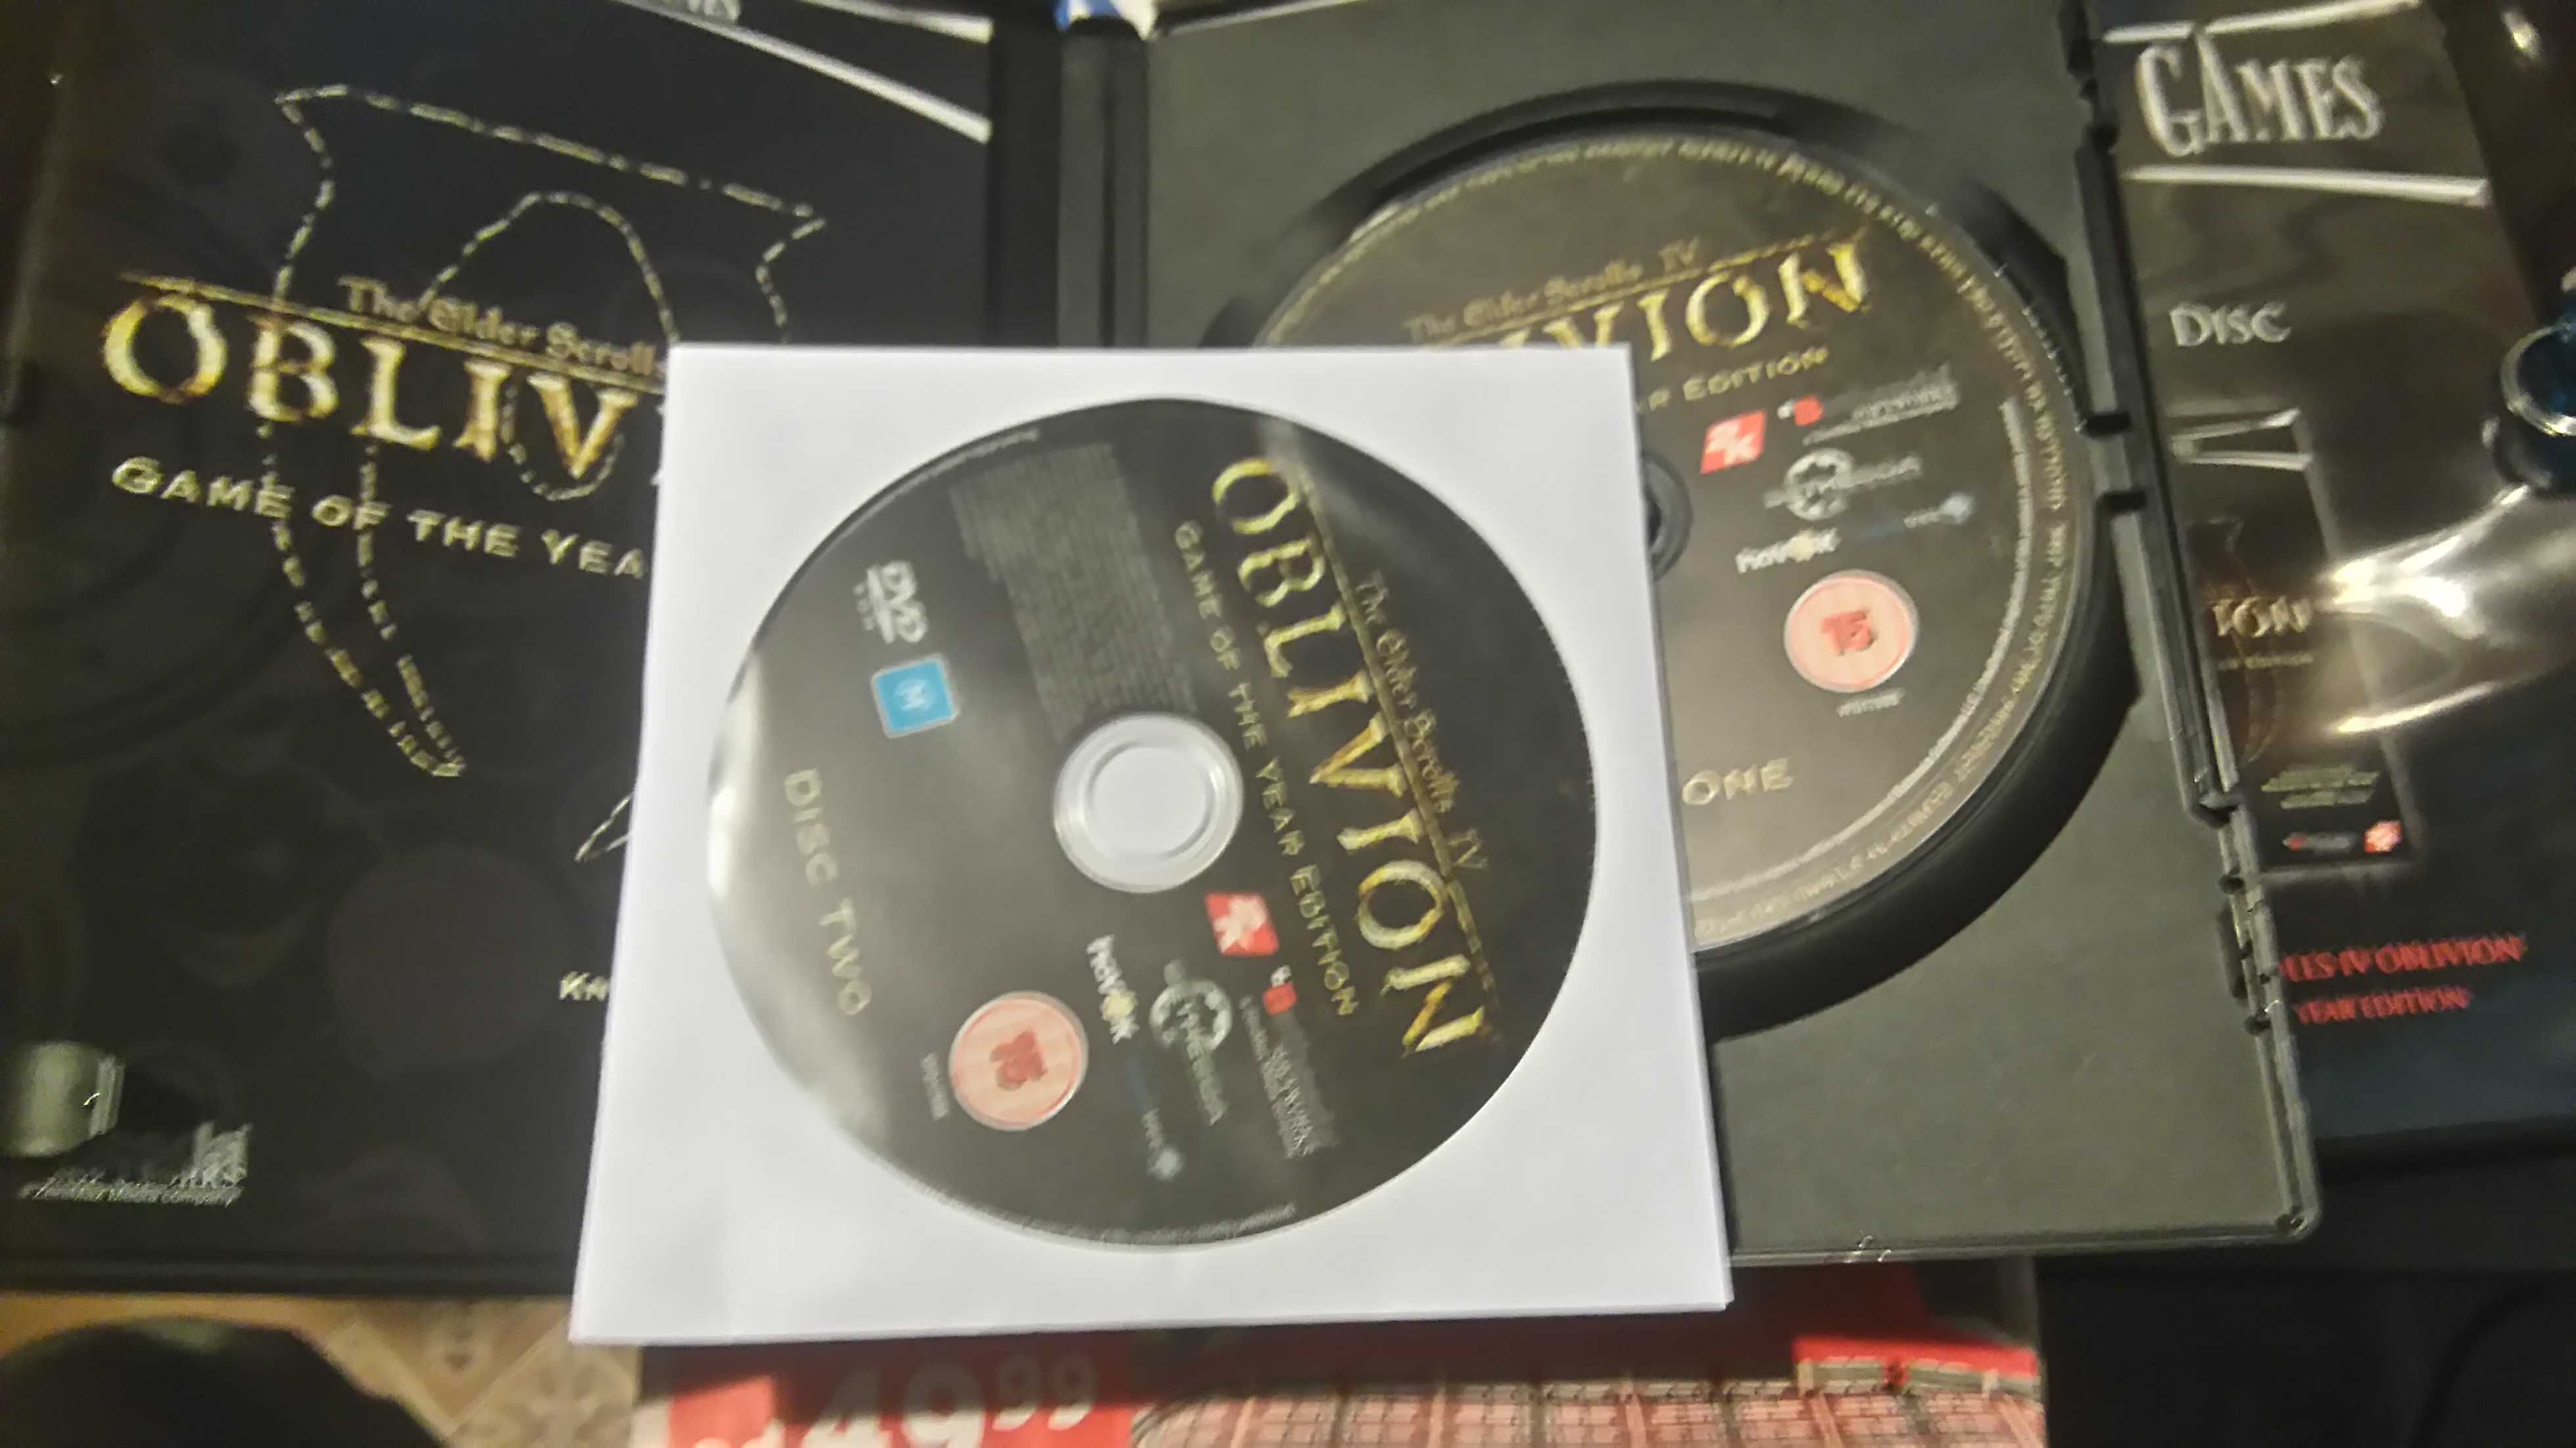 Oblivion-the Elder Scrolls 4-Game of the year Edition pc,pl